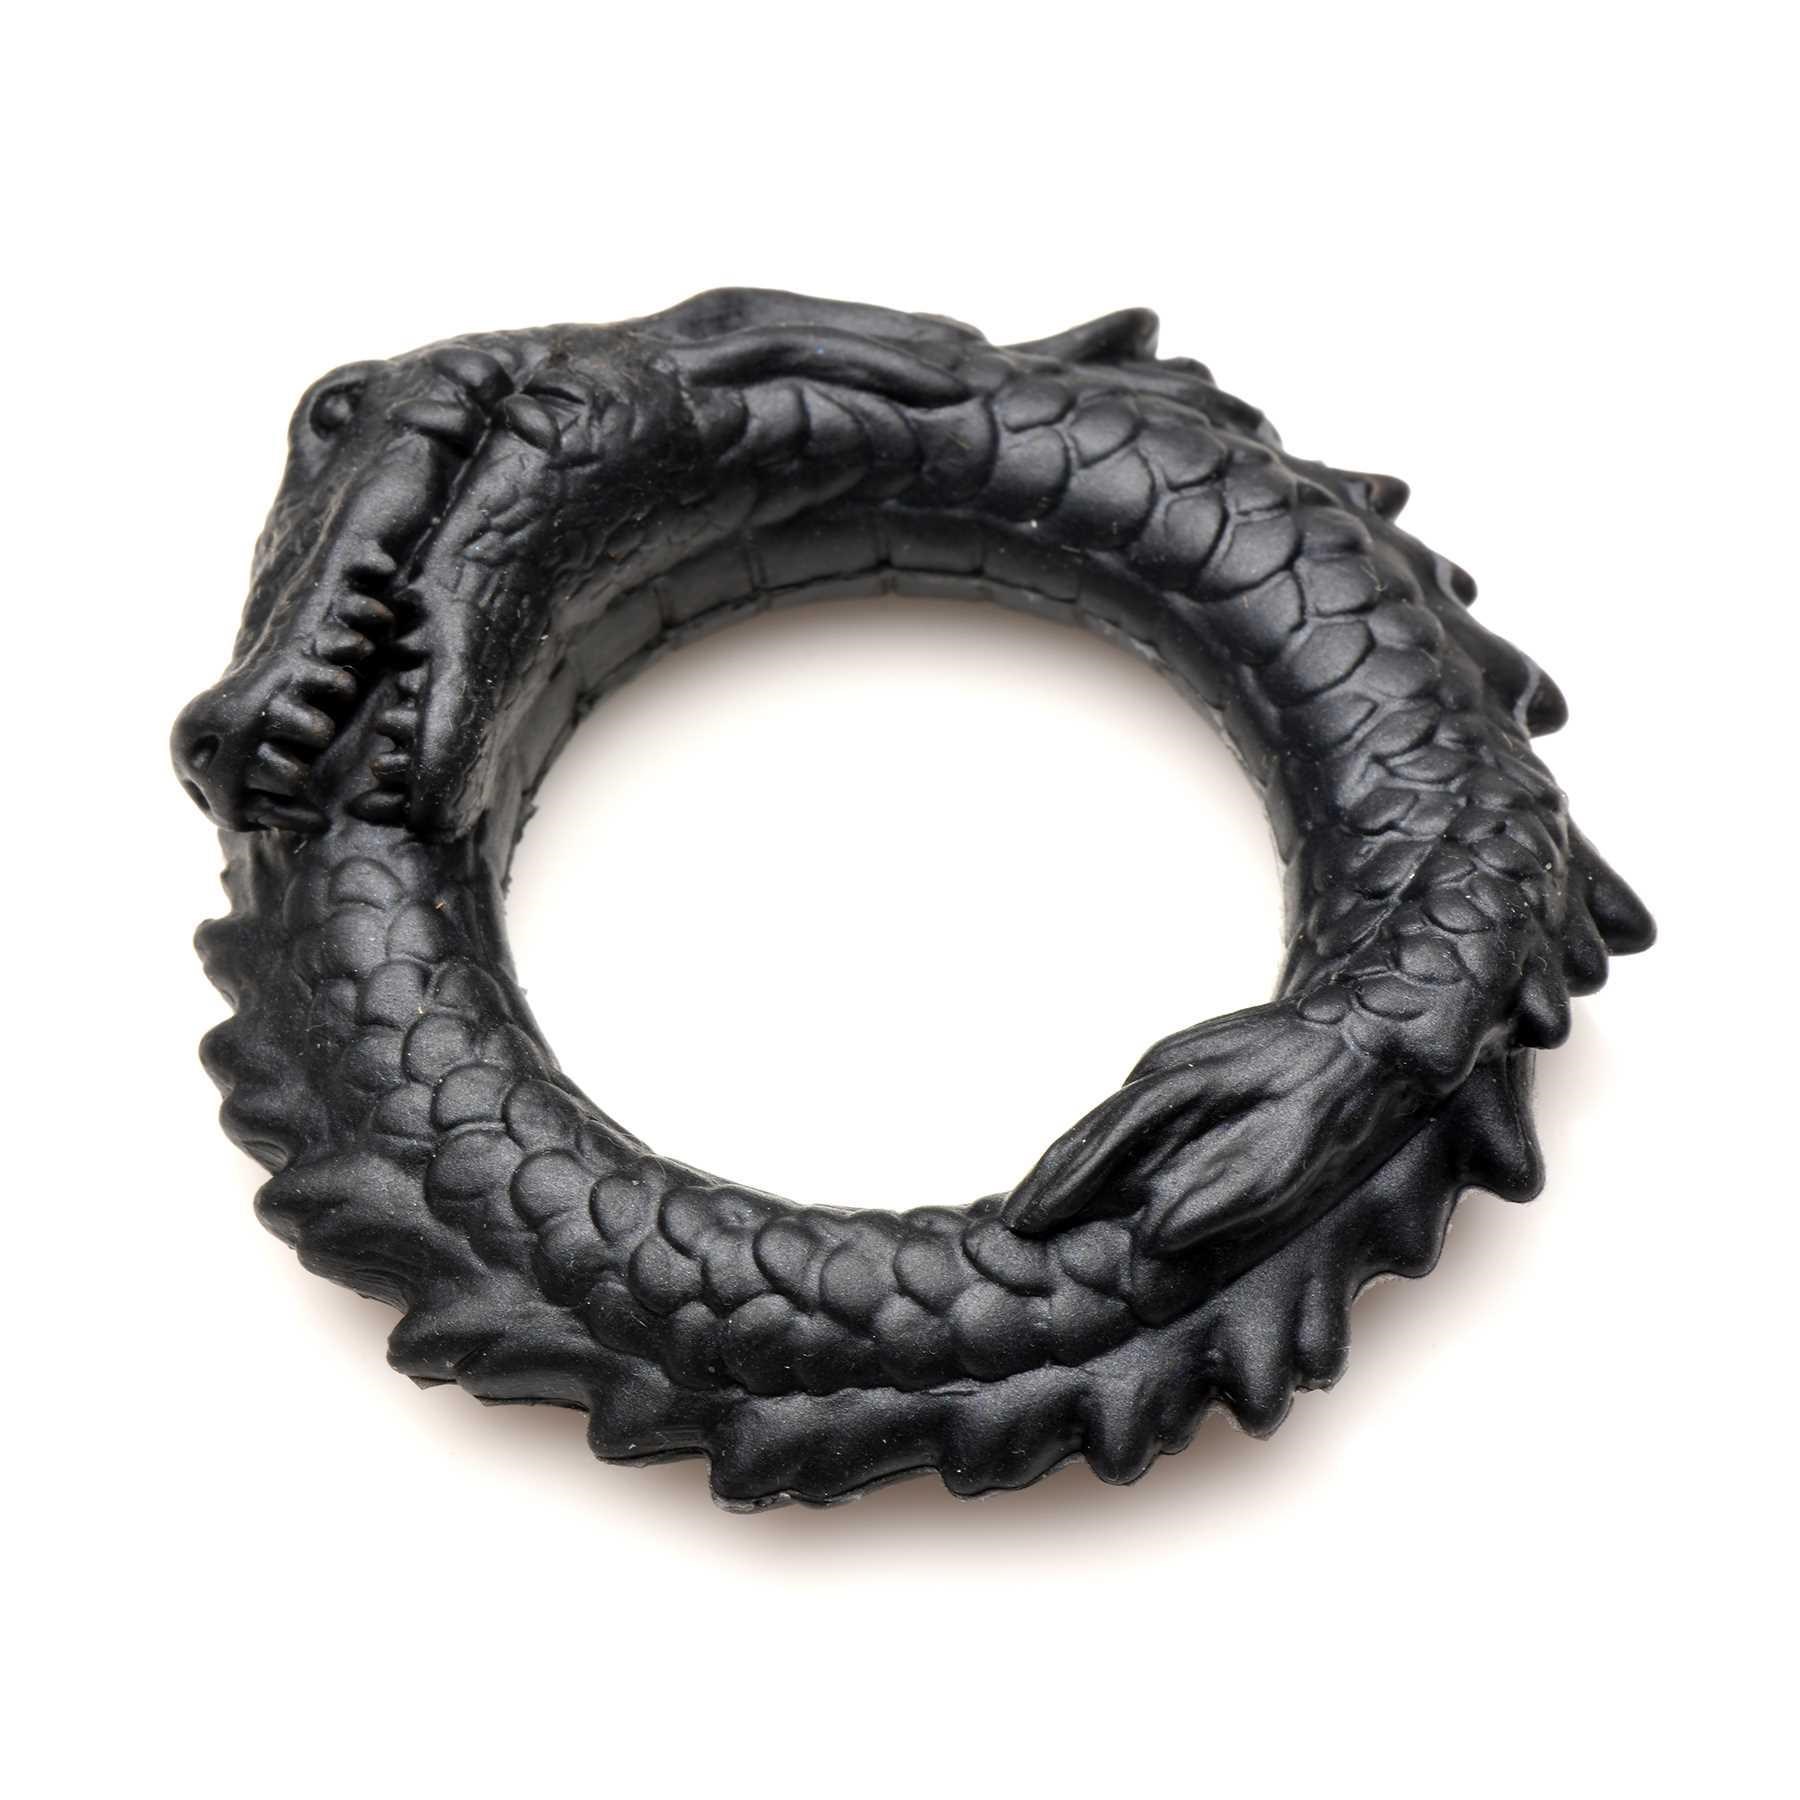 Creature Cocks Black Caiman Silicone Cock Ring laying flat on table